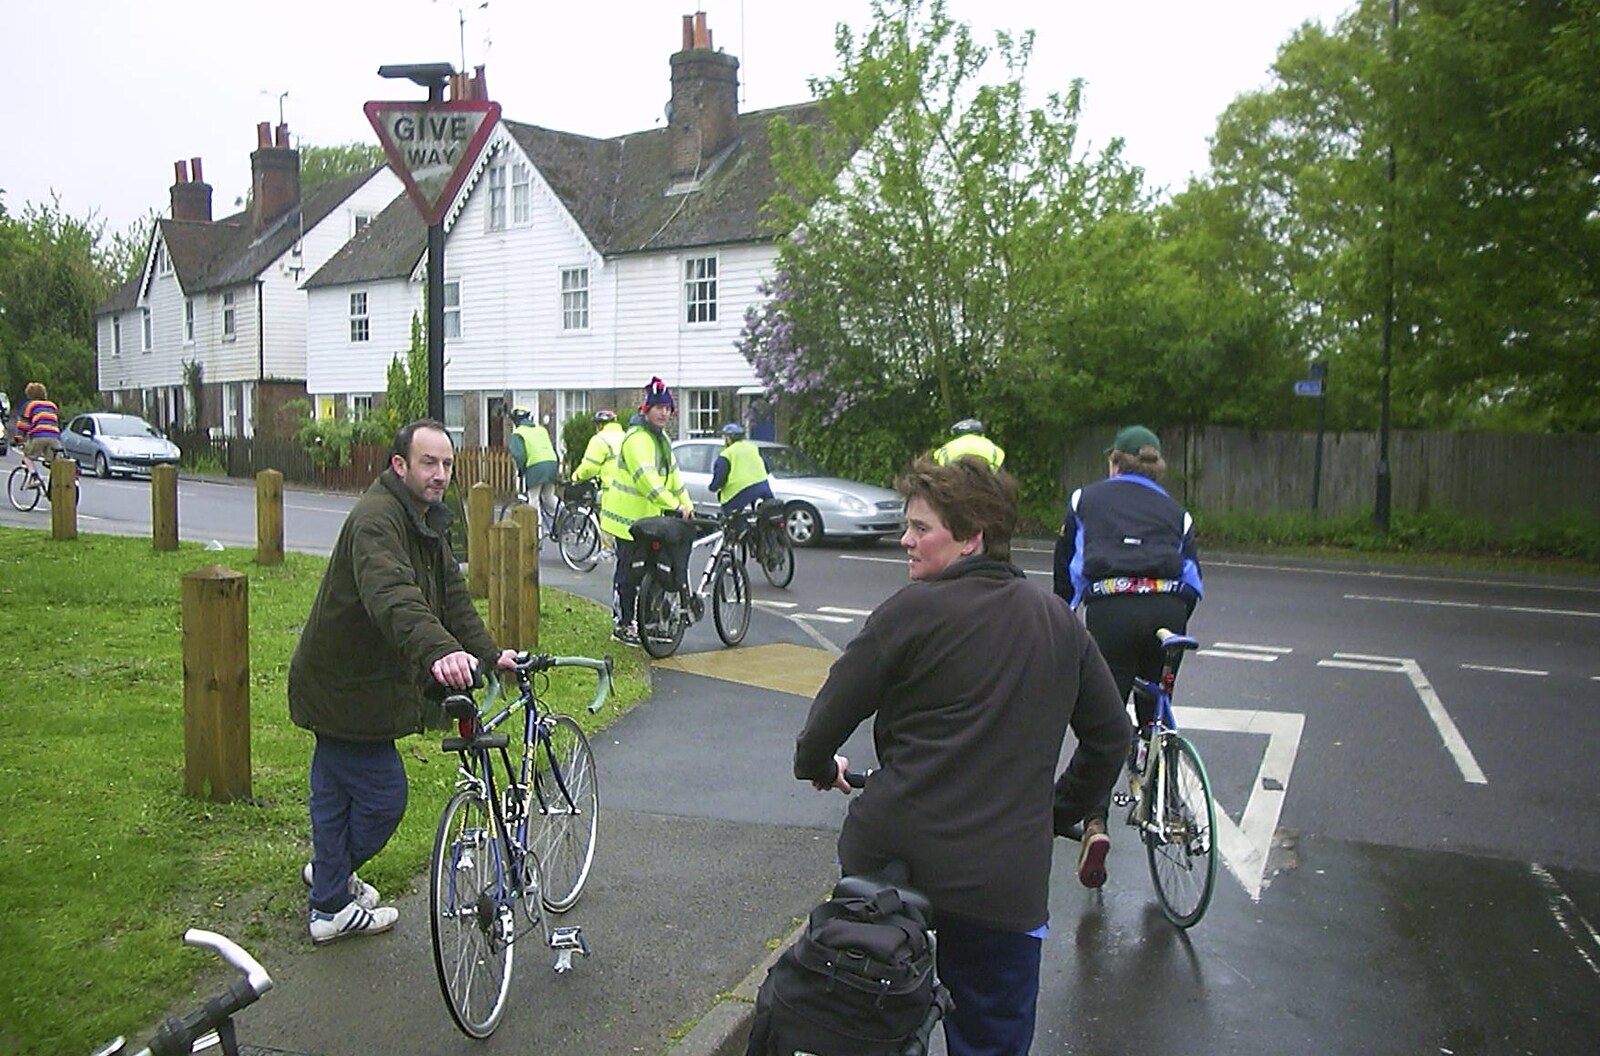 The BSCC Annual Bike Ride, Lenham, Kent - 8th May 2004: Just outside the half-way point at Tenterden